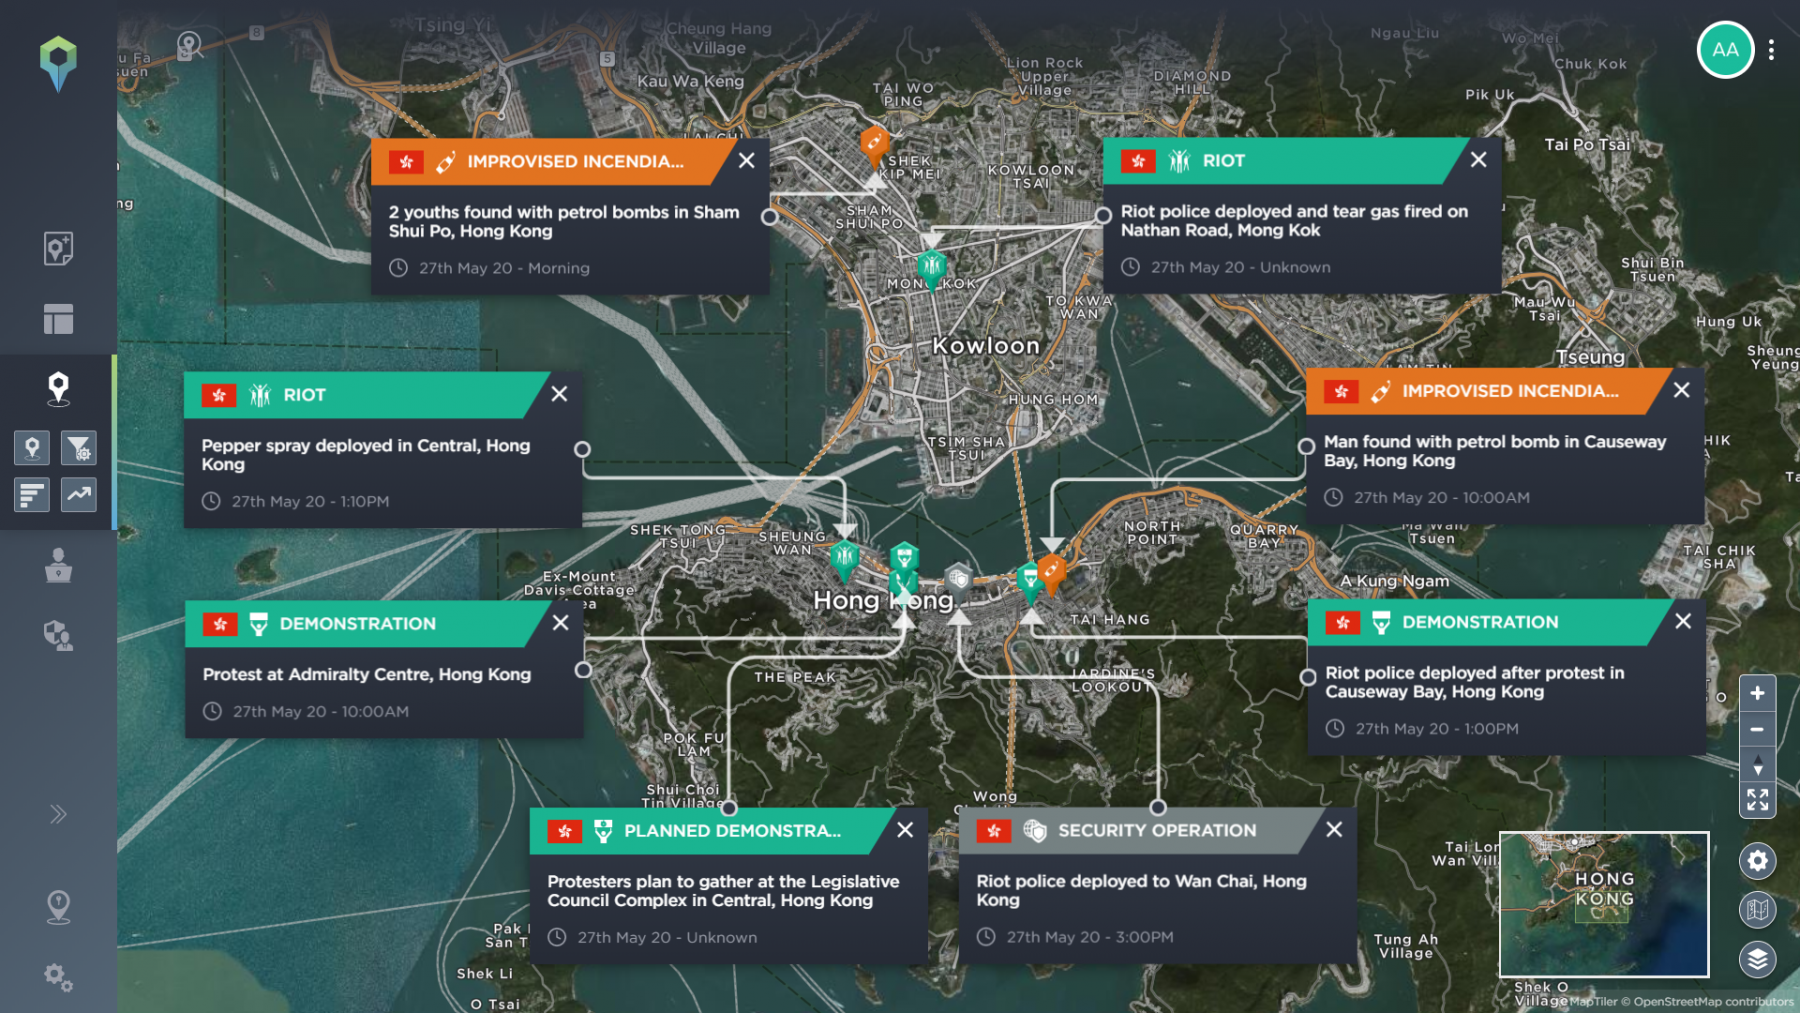 Map highlighting the reignited civil unrest across Hong Kong in May 2020